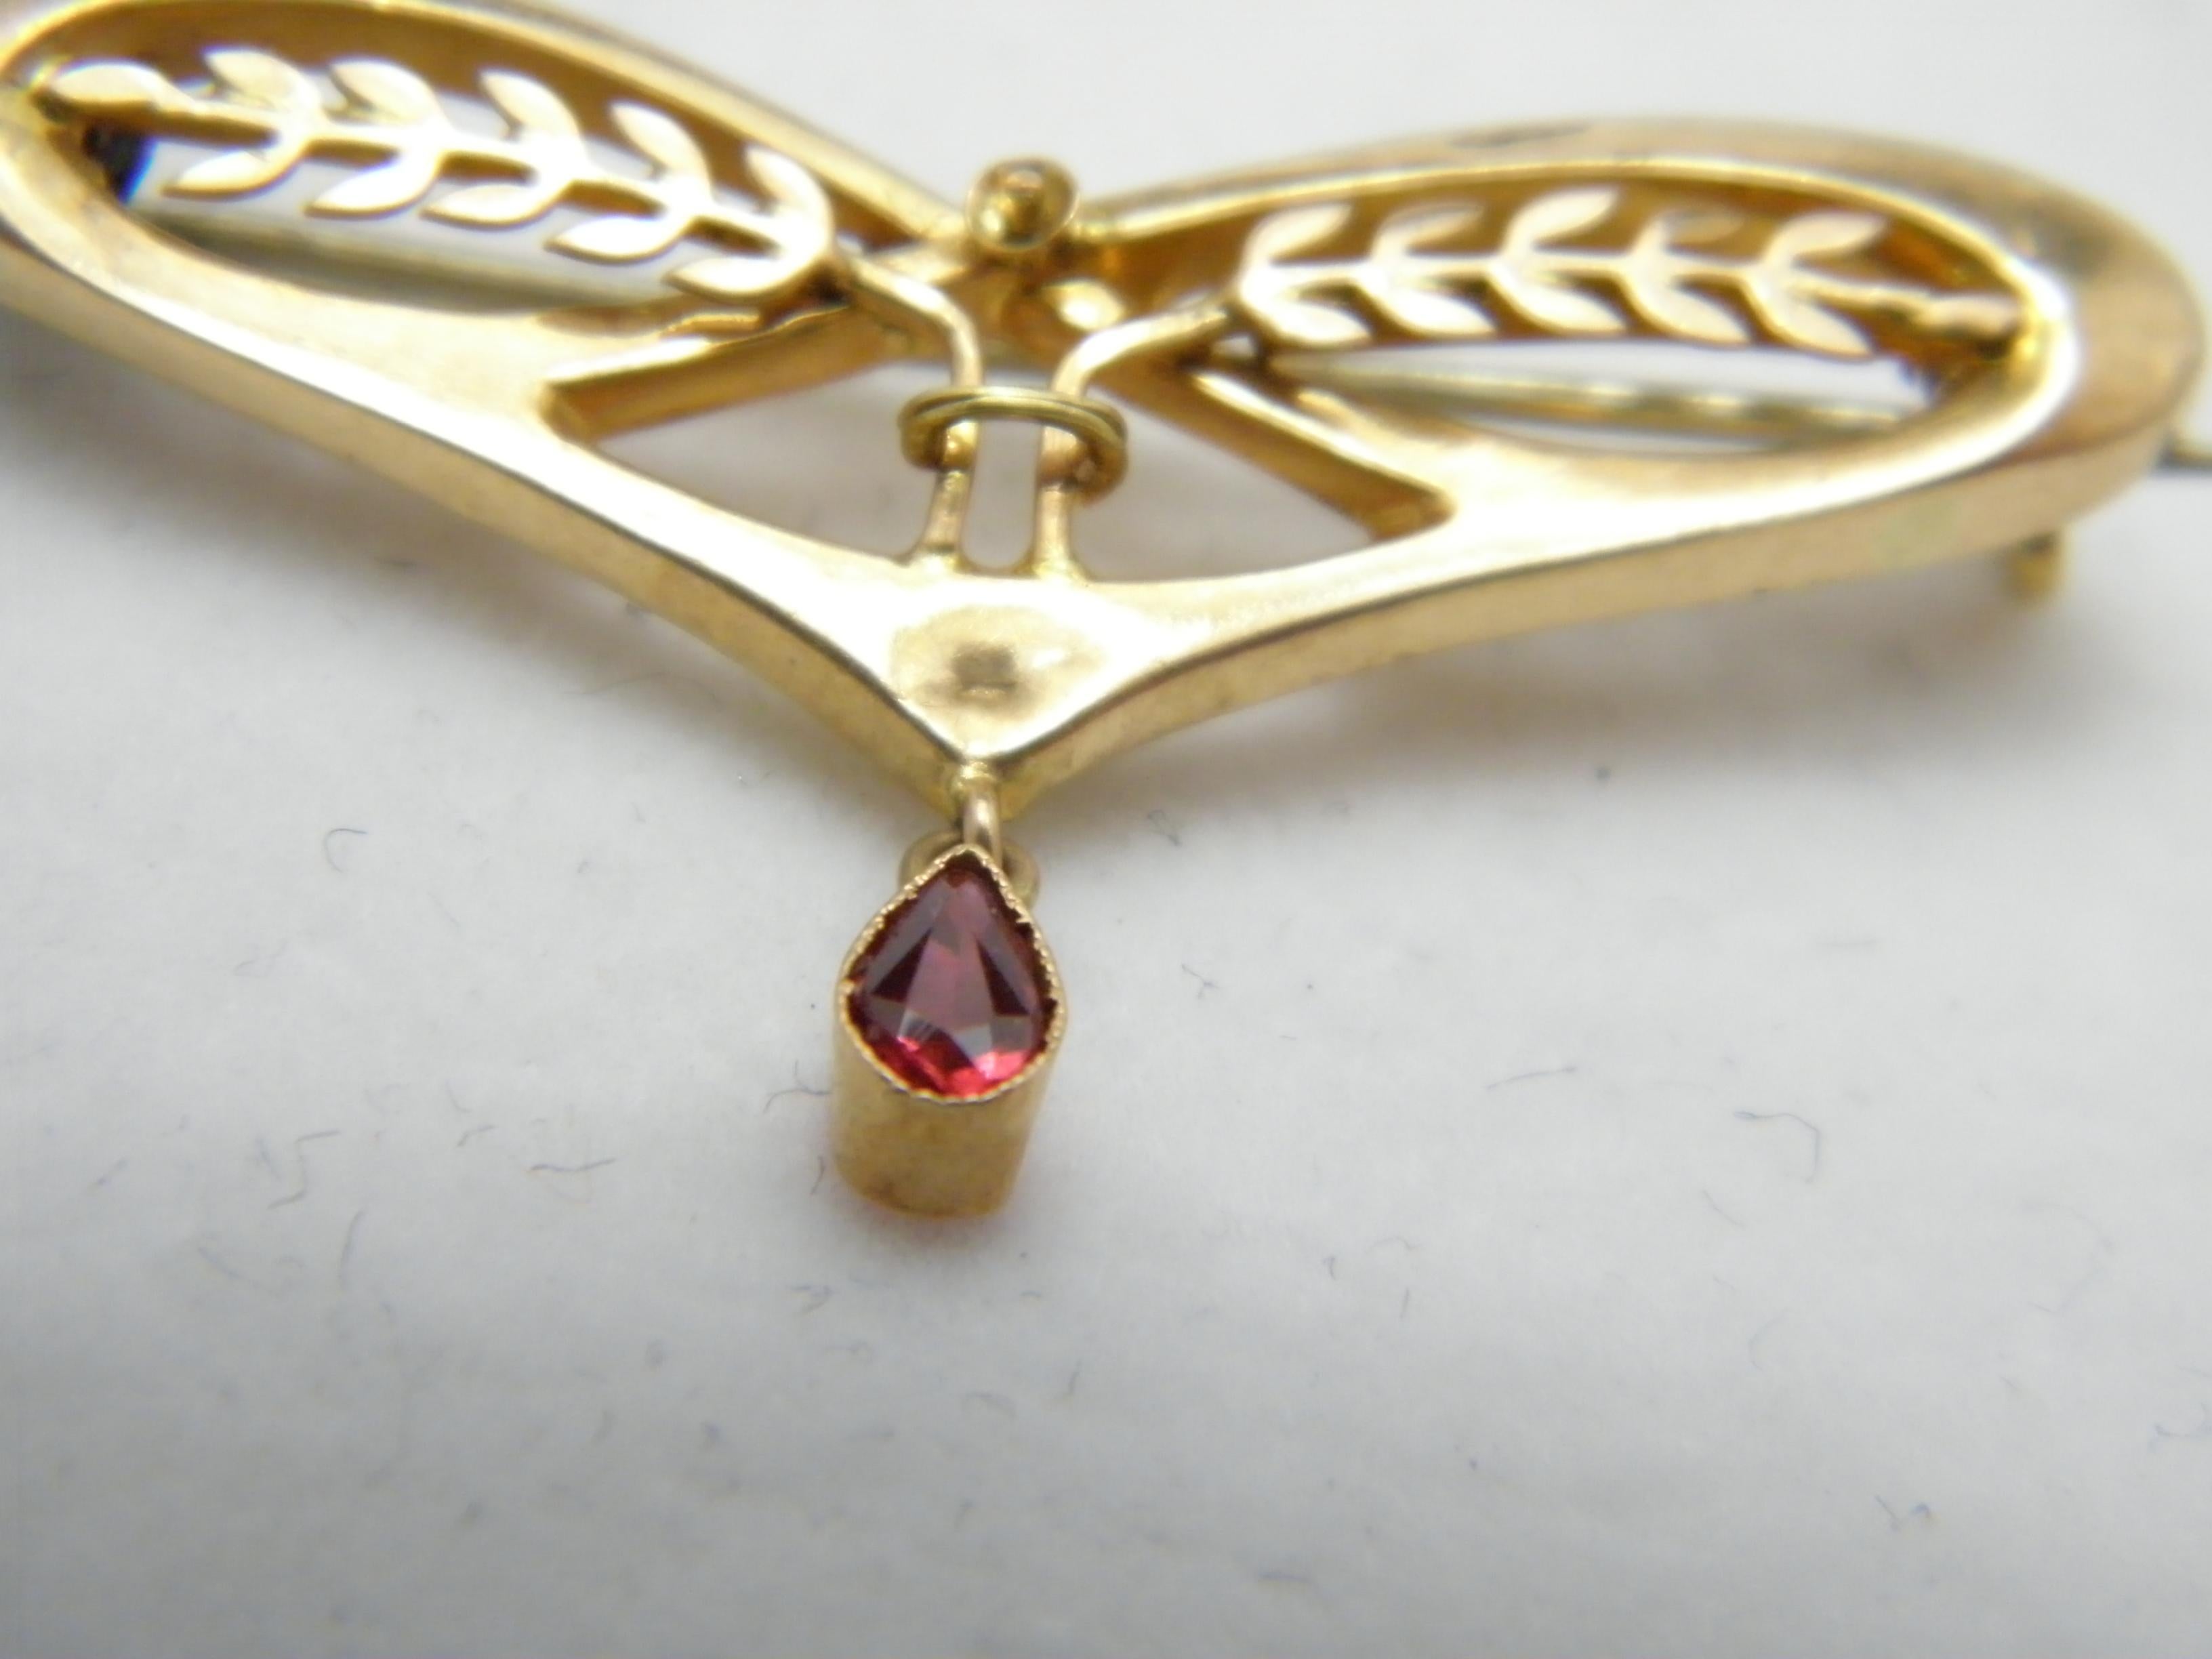 Bargain Vintage 18ct Gold Ruby Harvest Festival Brooch Pin c1950 750 Purity In Fair Condition For Sale In Camelford, GB